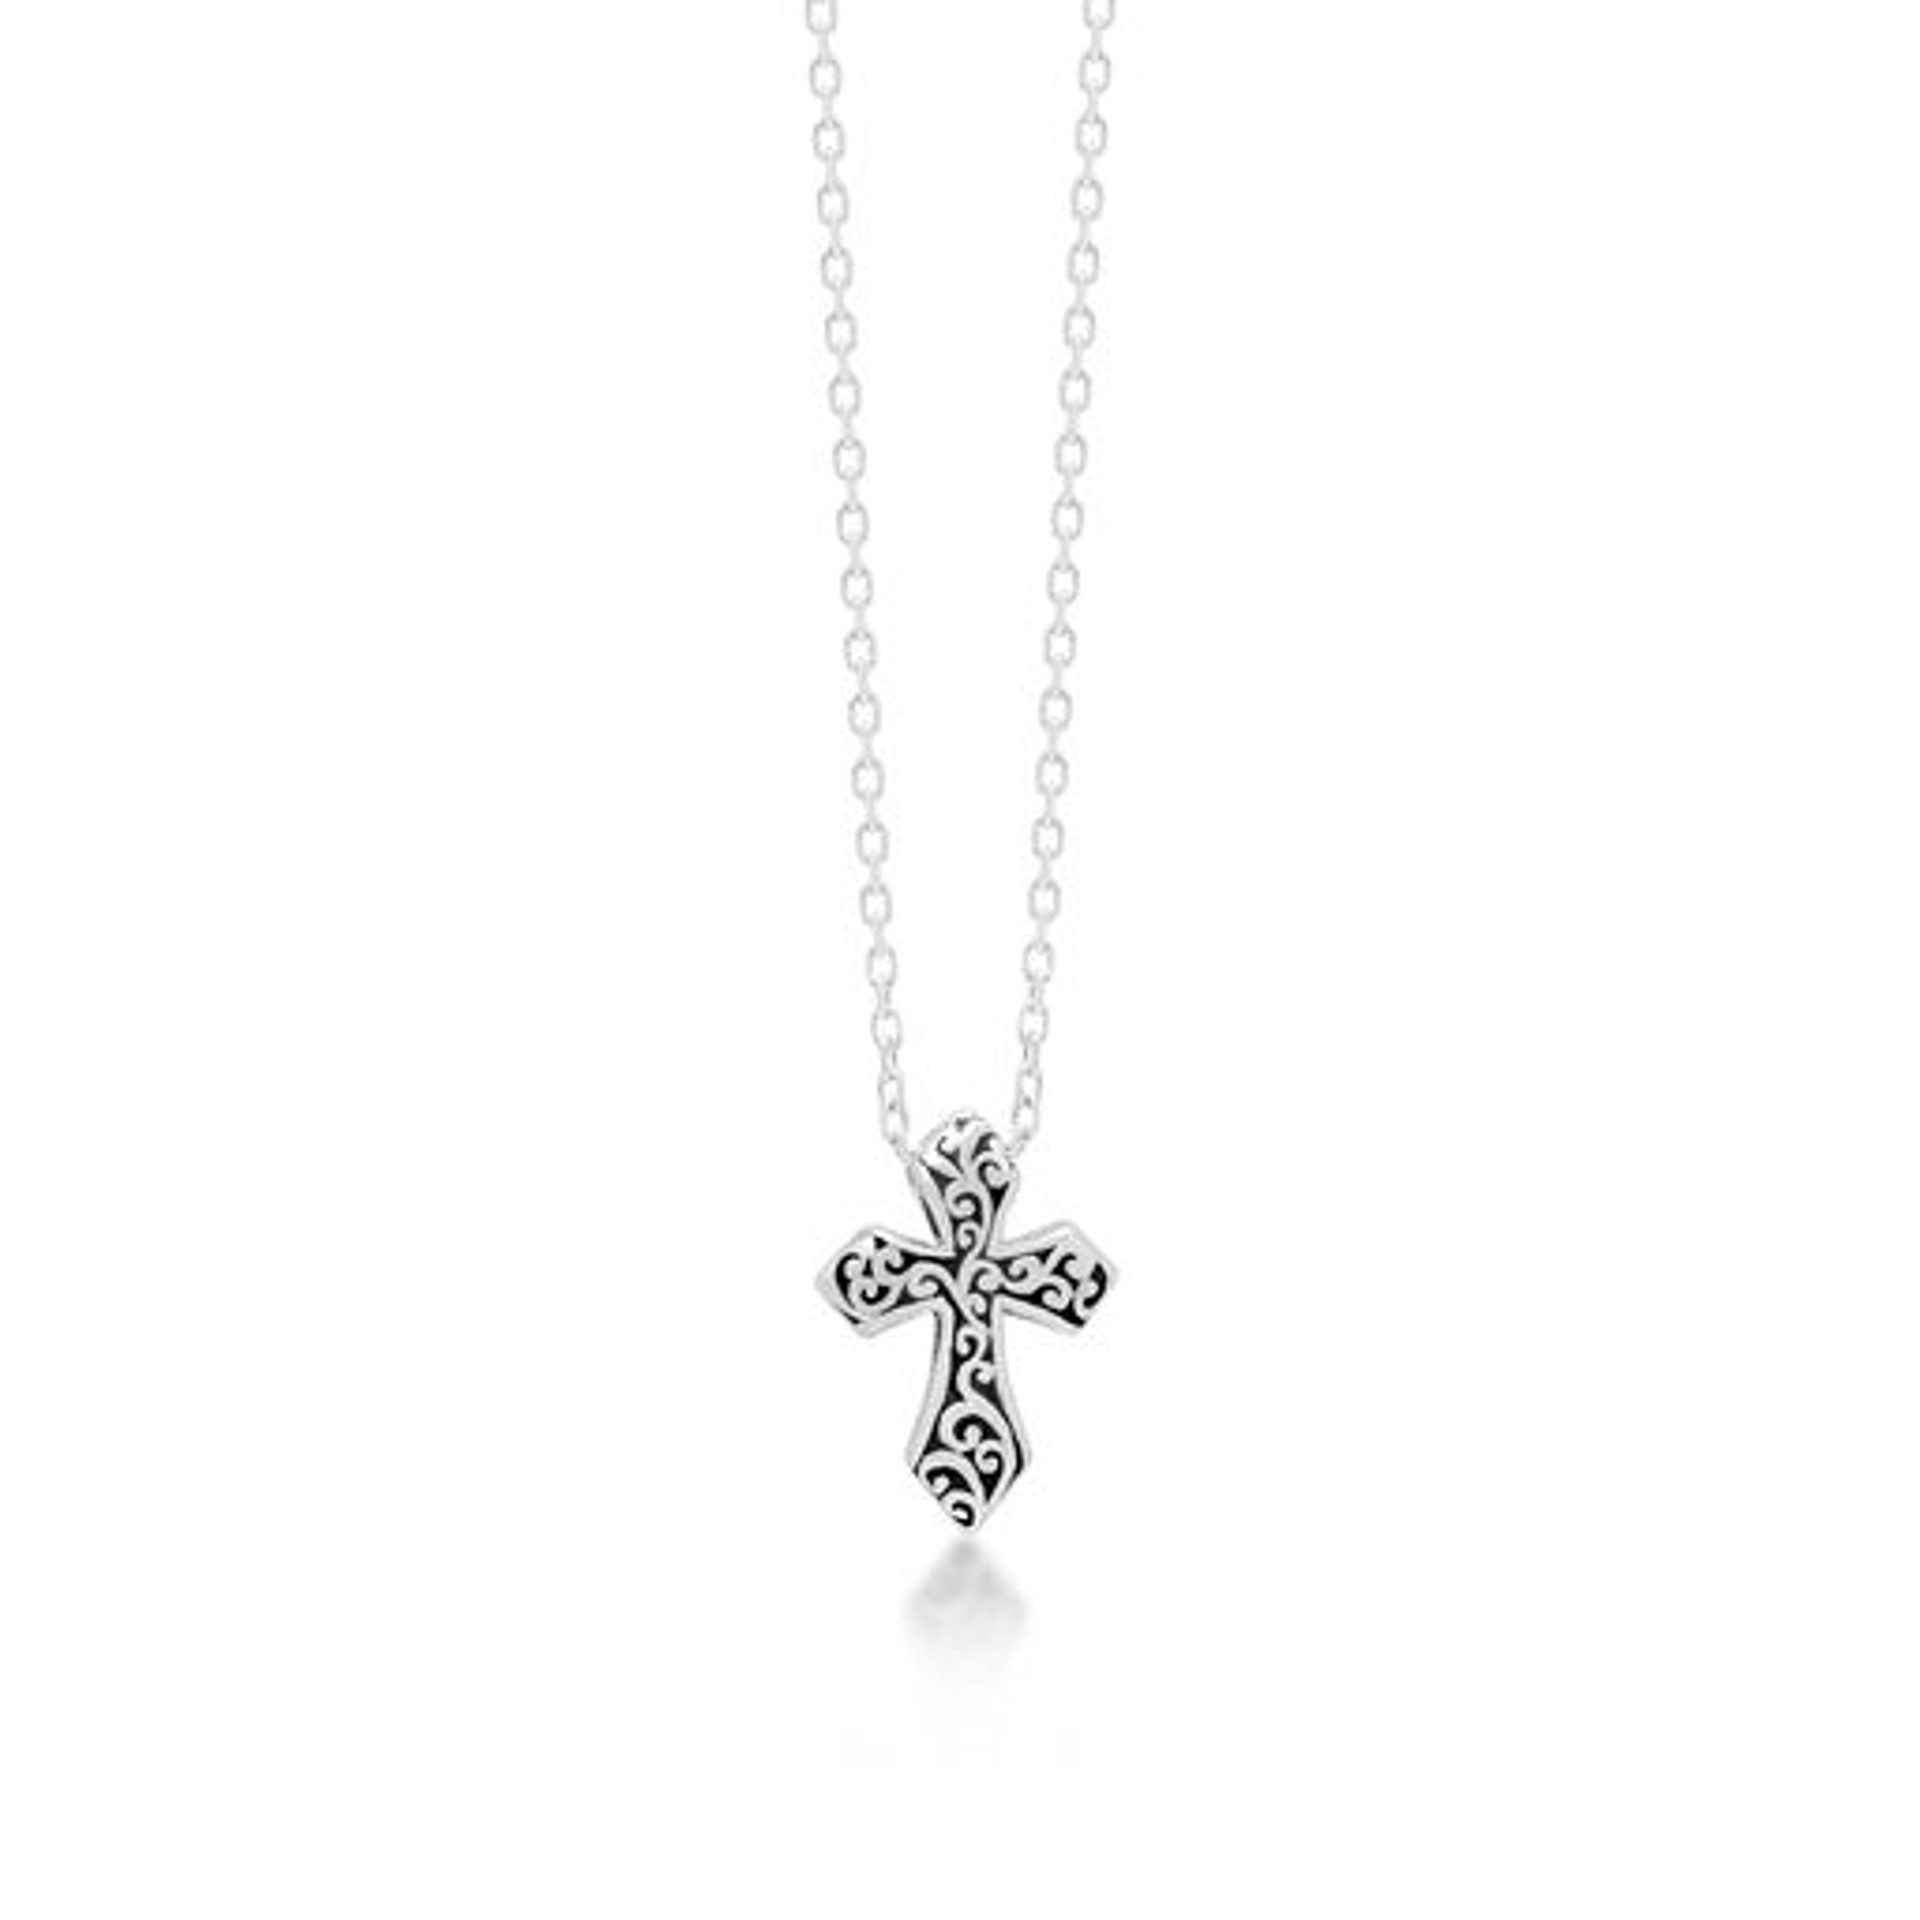 6989 Sterling Silver Cross Necklace by Lois Hill